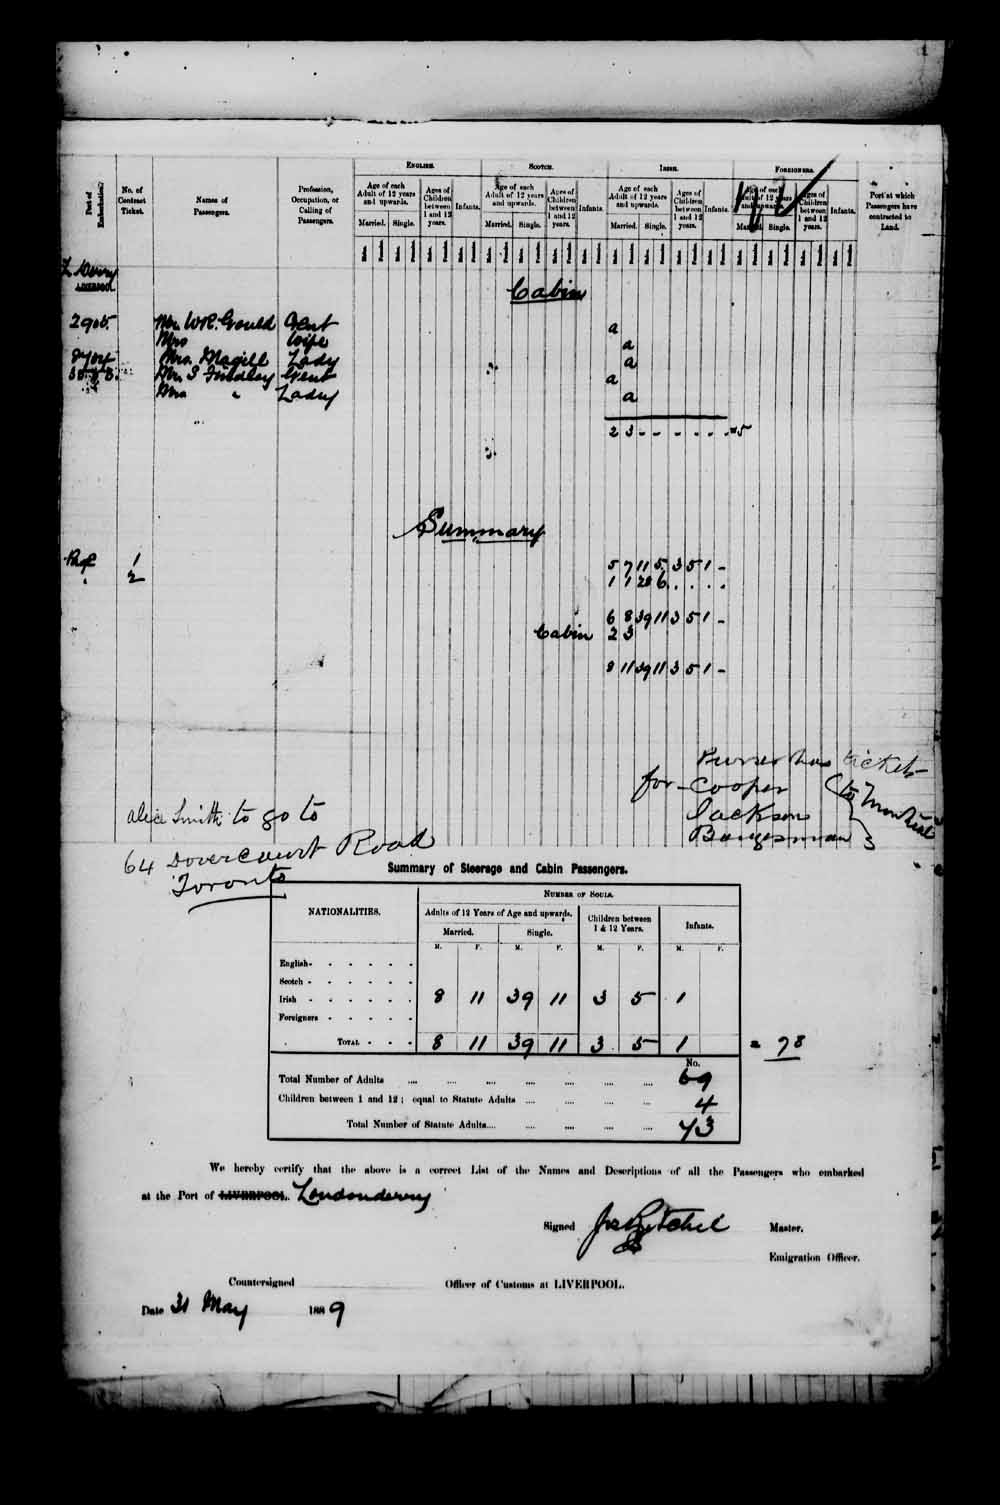 Digitized page of Passenger Lists for Image No.: e003549681